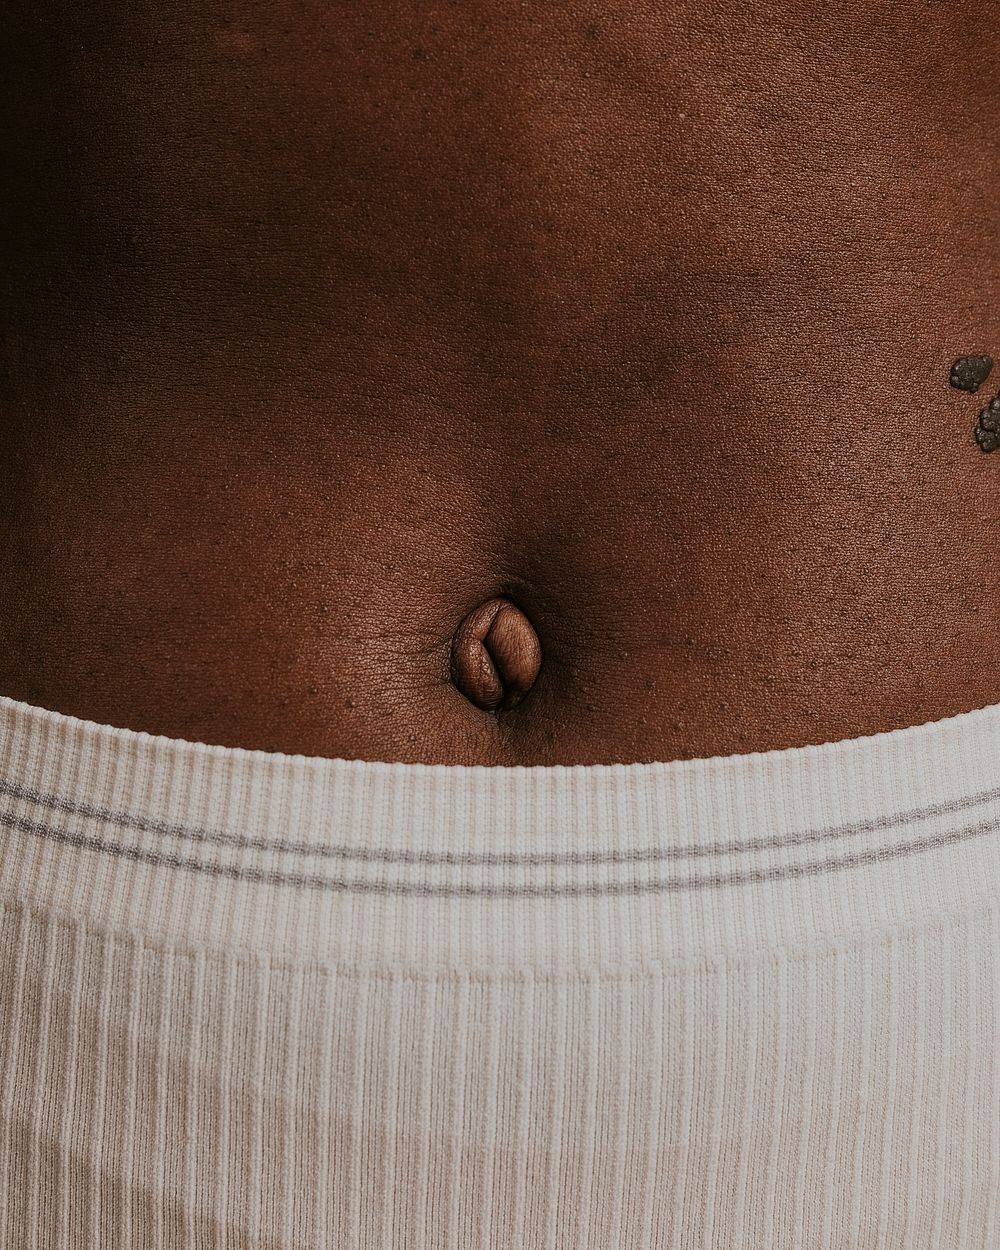 African woman's belly button closeup photo